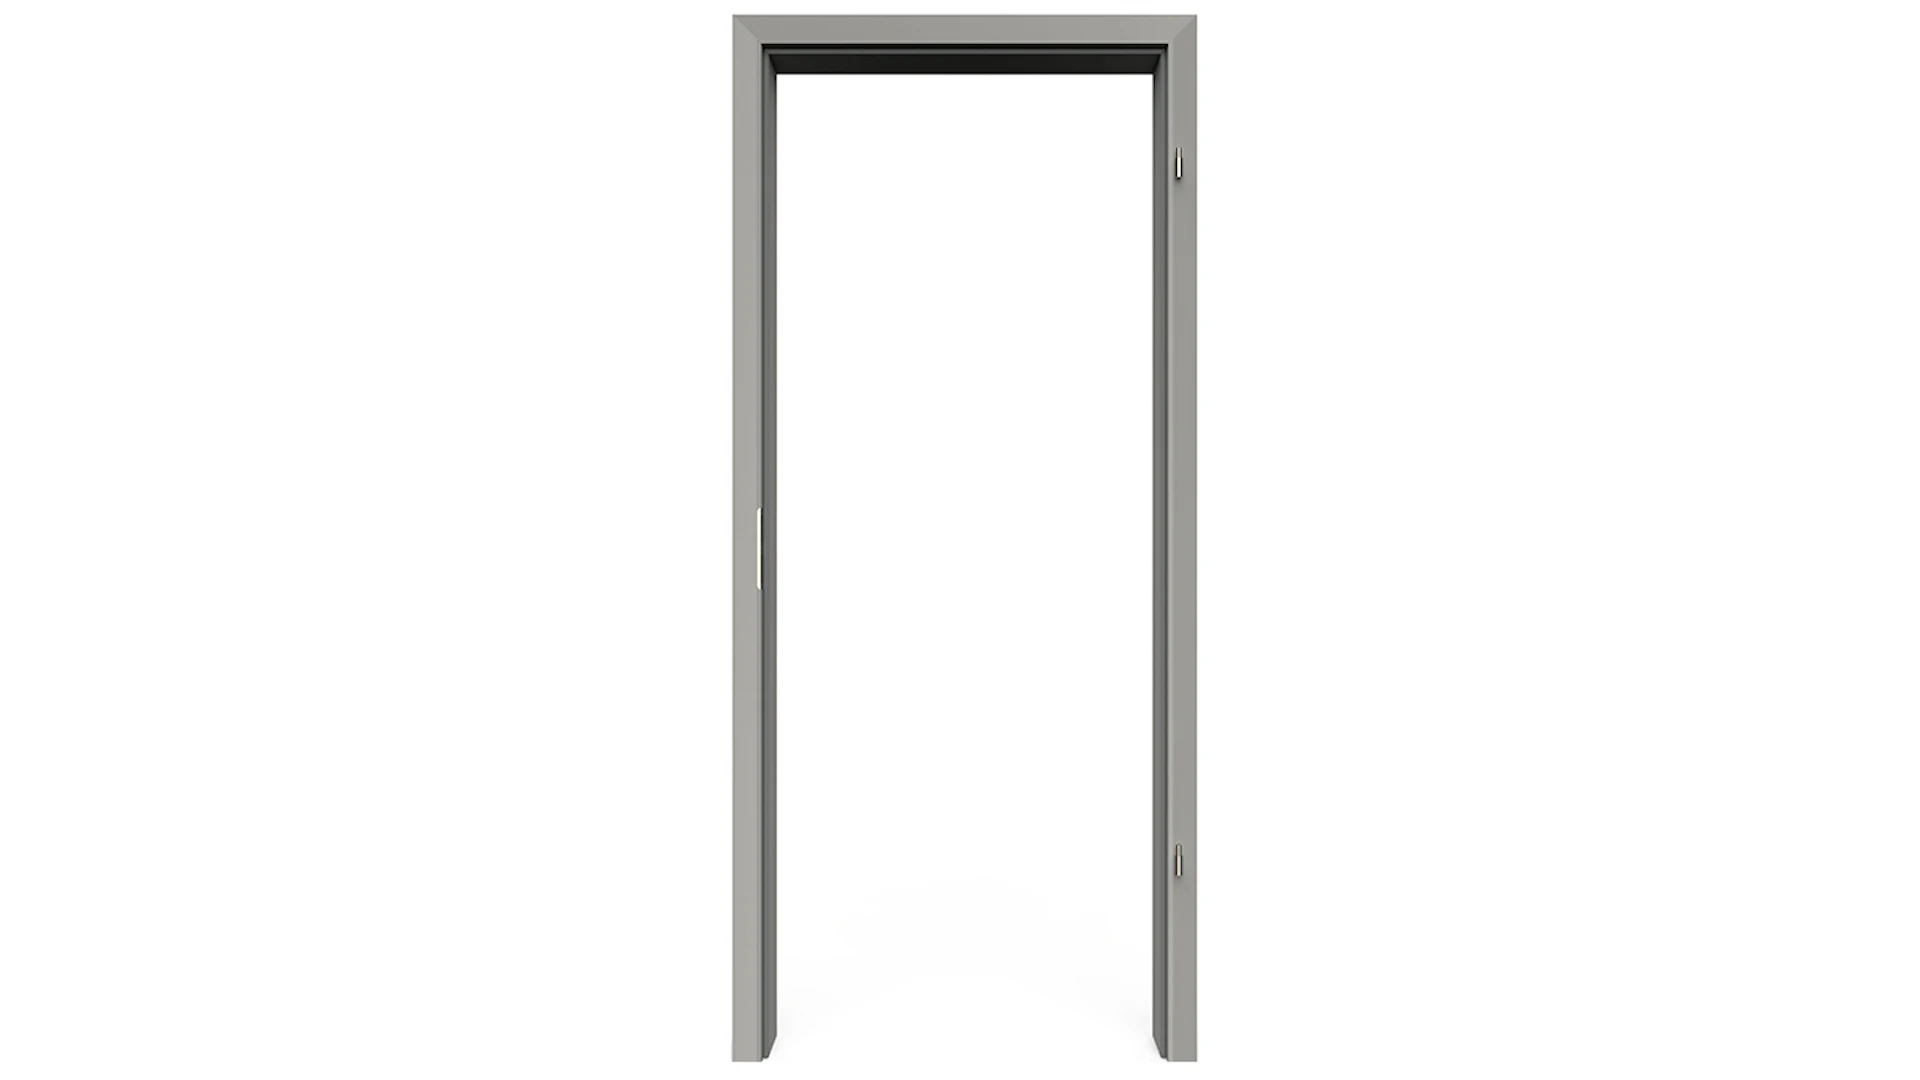 planeo Standard Doorframe Rounded edge - CPL Silver grey - 2110 x 610 x 310 mm DIN Right